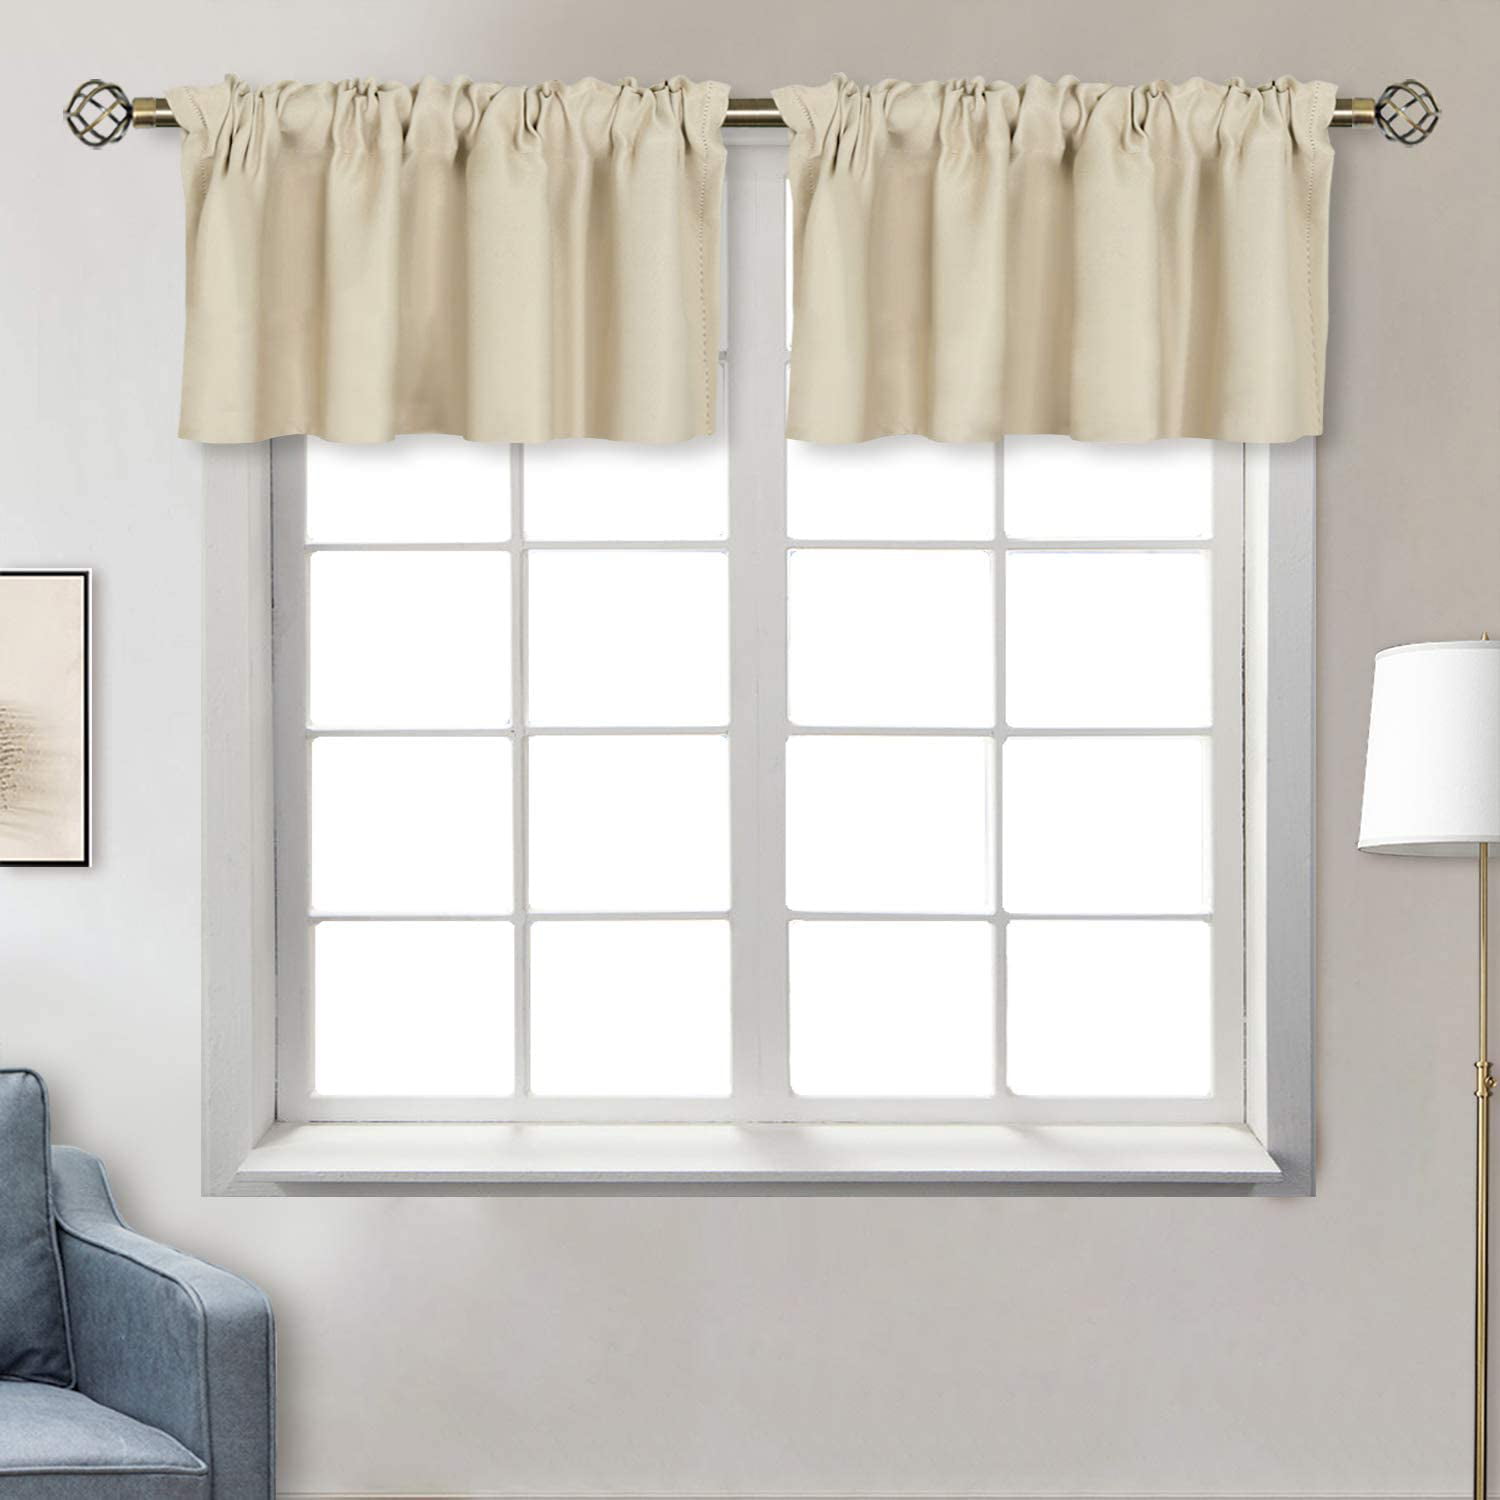 Small Window Curtain Valance for Loft Small Windows Navy Blue,30 W x 14 Inch Length,1 Panel SeeGlee Ombre Blackout Water-Proof Curtain Valance for Kitchen